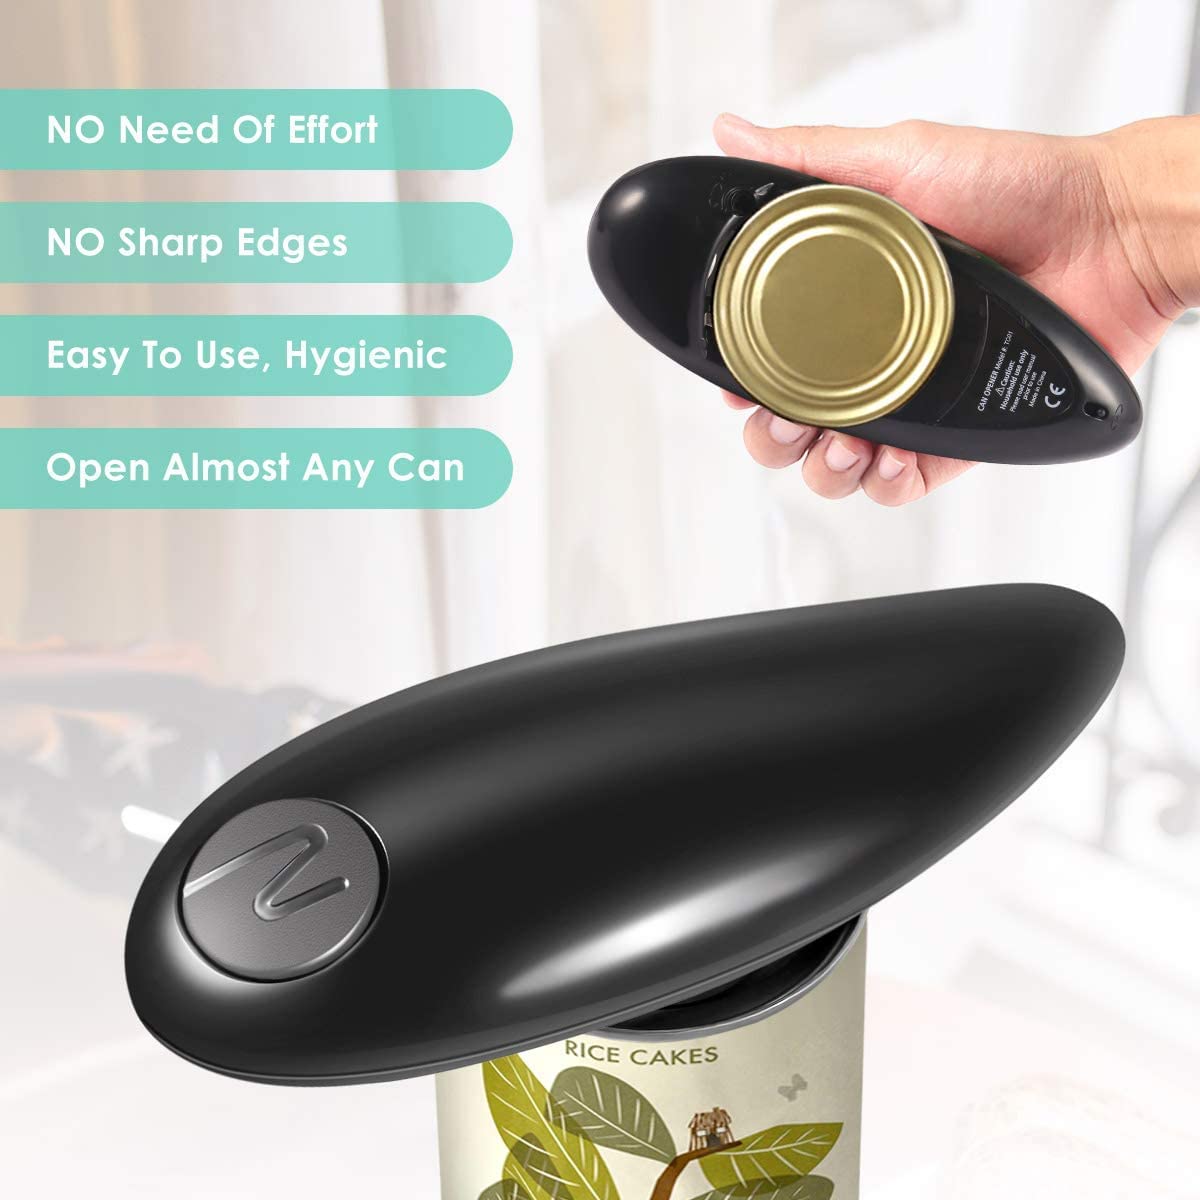 Hands Free Battery Operated Electric Can Opener Open Most Can Smooth Edge, Automatic Can Opener for Seniors, Arthritis, and Chefs, Electric Can Openers for Kitchen Food-Safe Magnetic Catches Cover